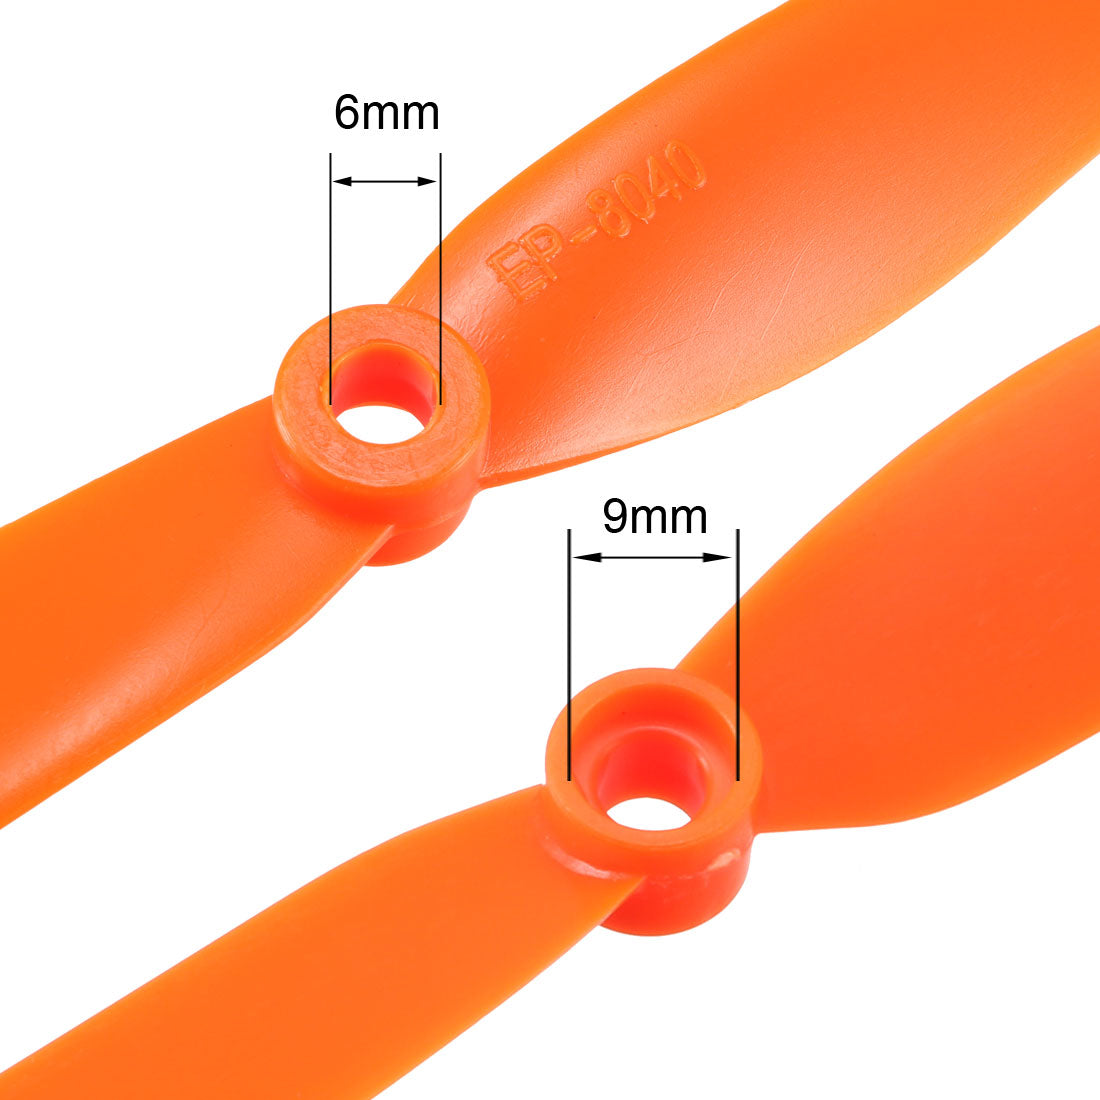 uxcell Uxcell RC Propellers  8040 8x4 Inch 2-Vane Fixed-Wing for Airplane Toy, Nylon Orange 10pcs with Adapter Rings